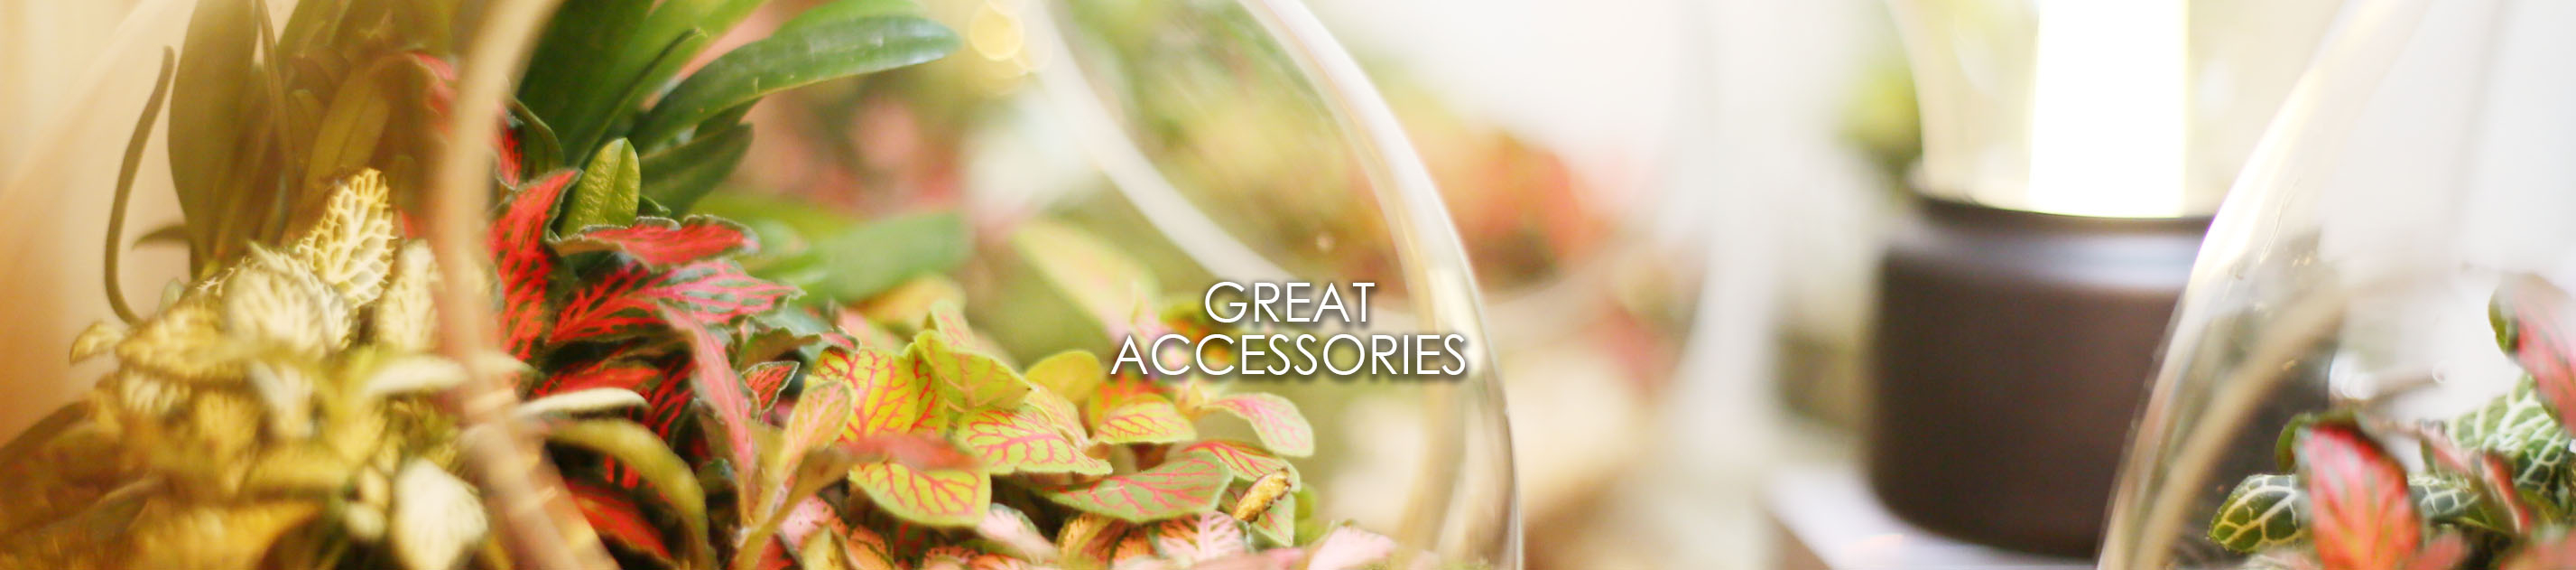 Great Accessories